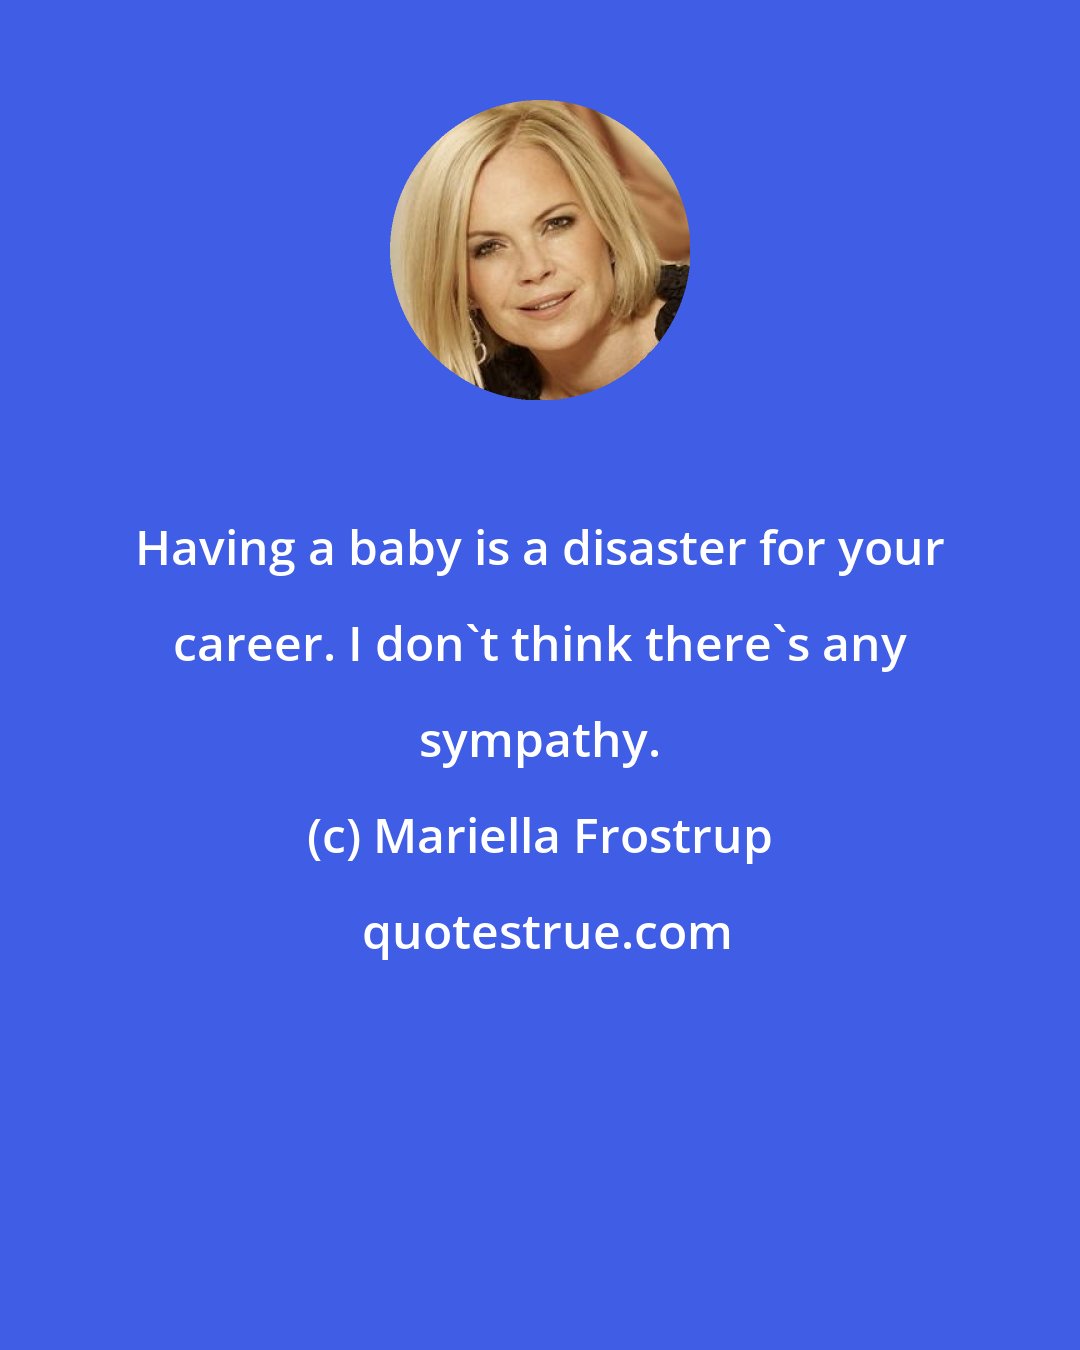 Mariella Frostrup: Having a baby is a disaster for your career. I don't think there's any sympathy.